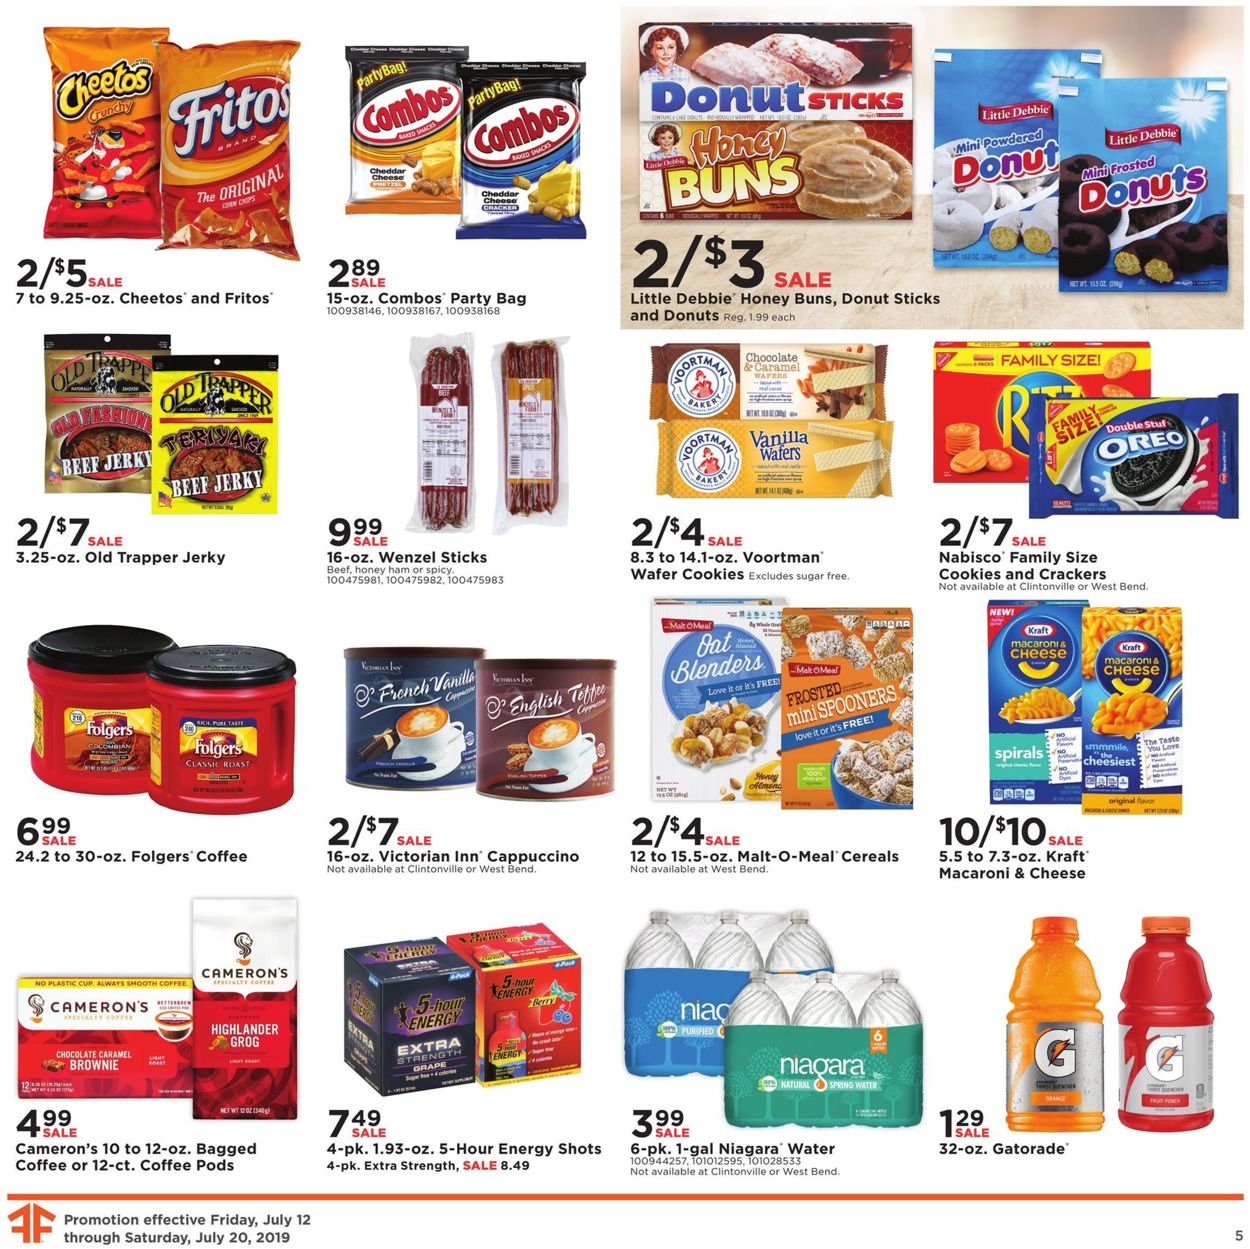 mills-fleet-farm-current-weekly-ad-07-12-07-20-2019-5-frequent